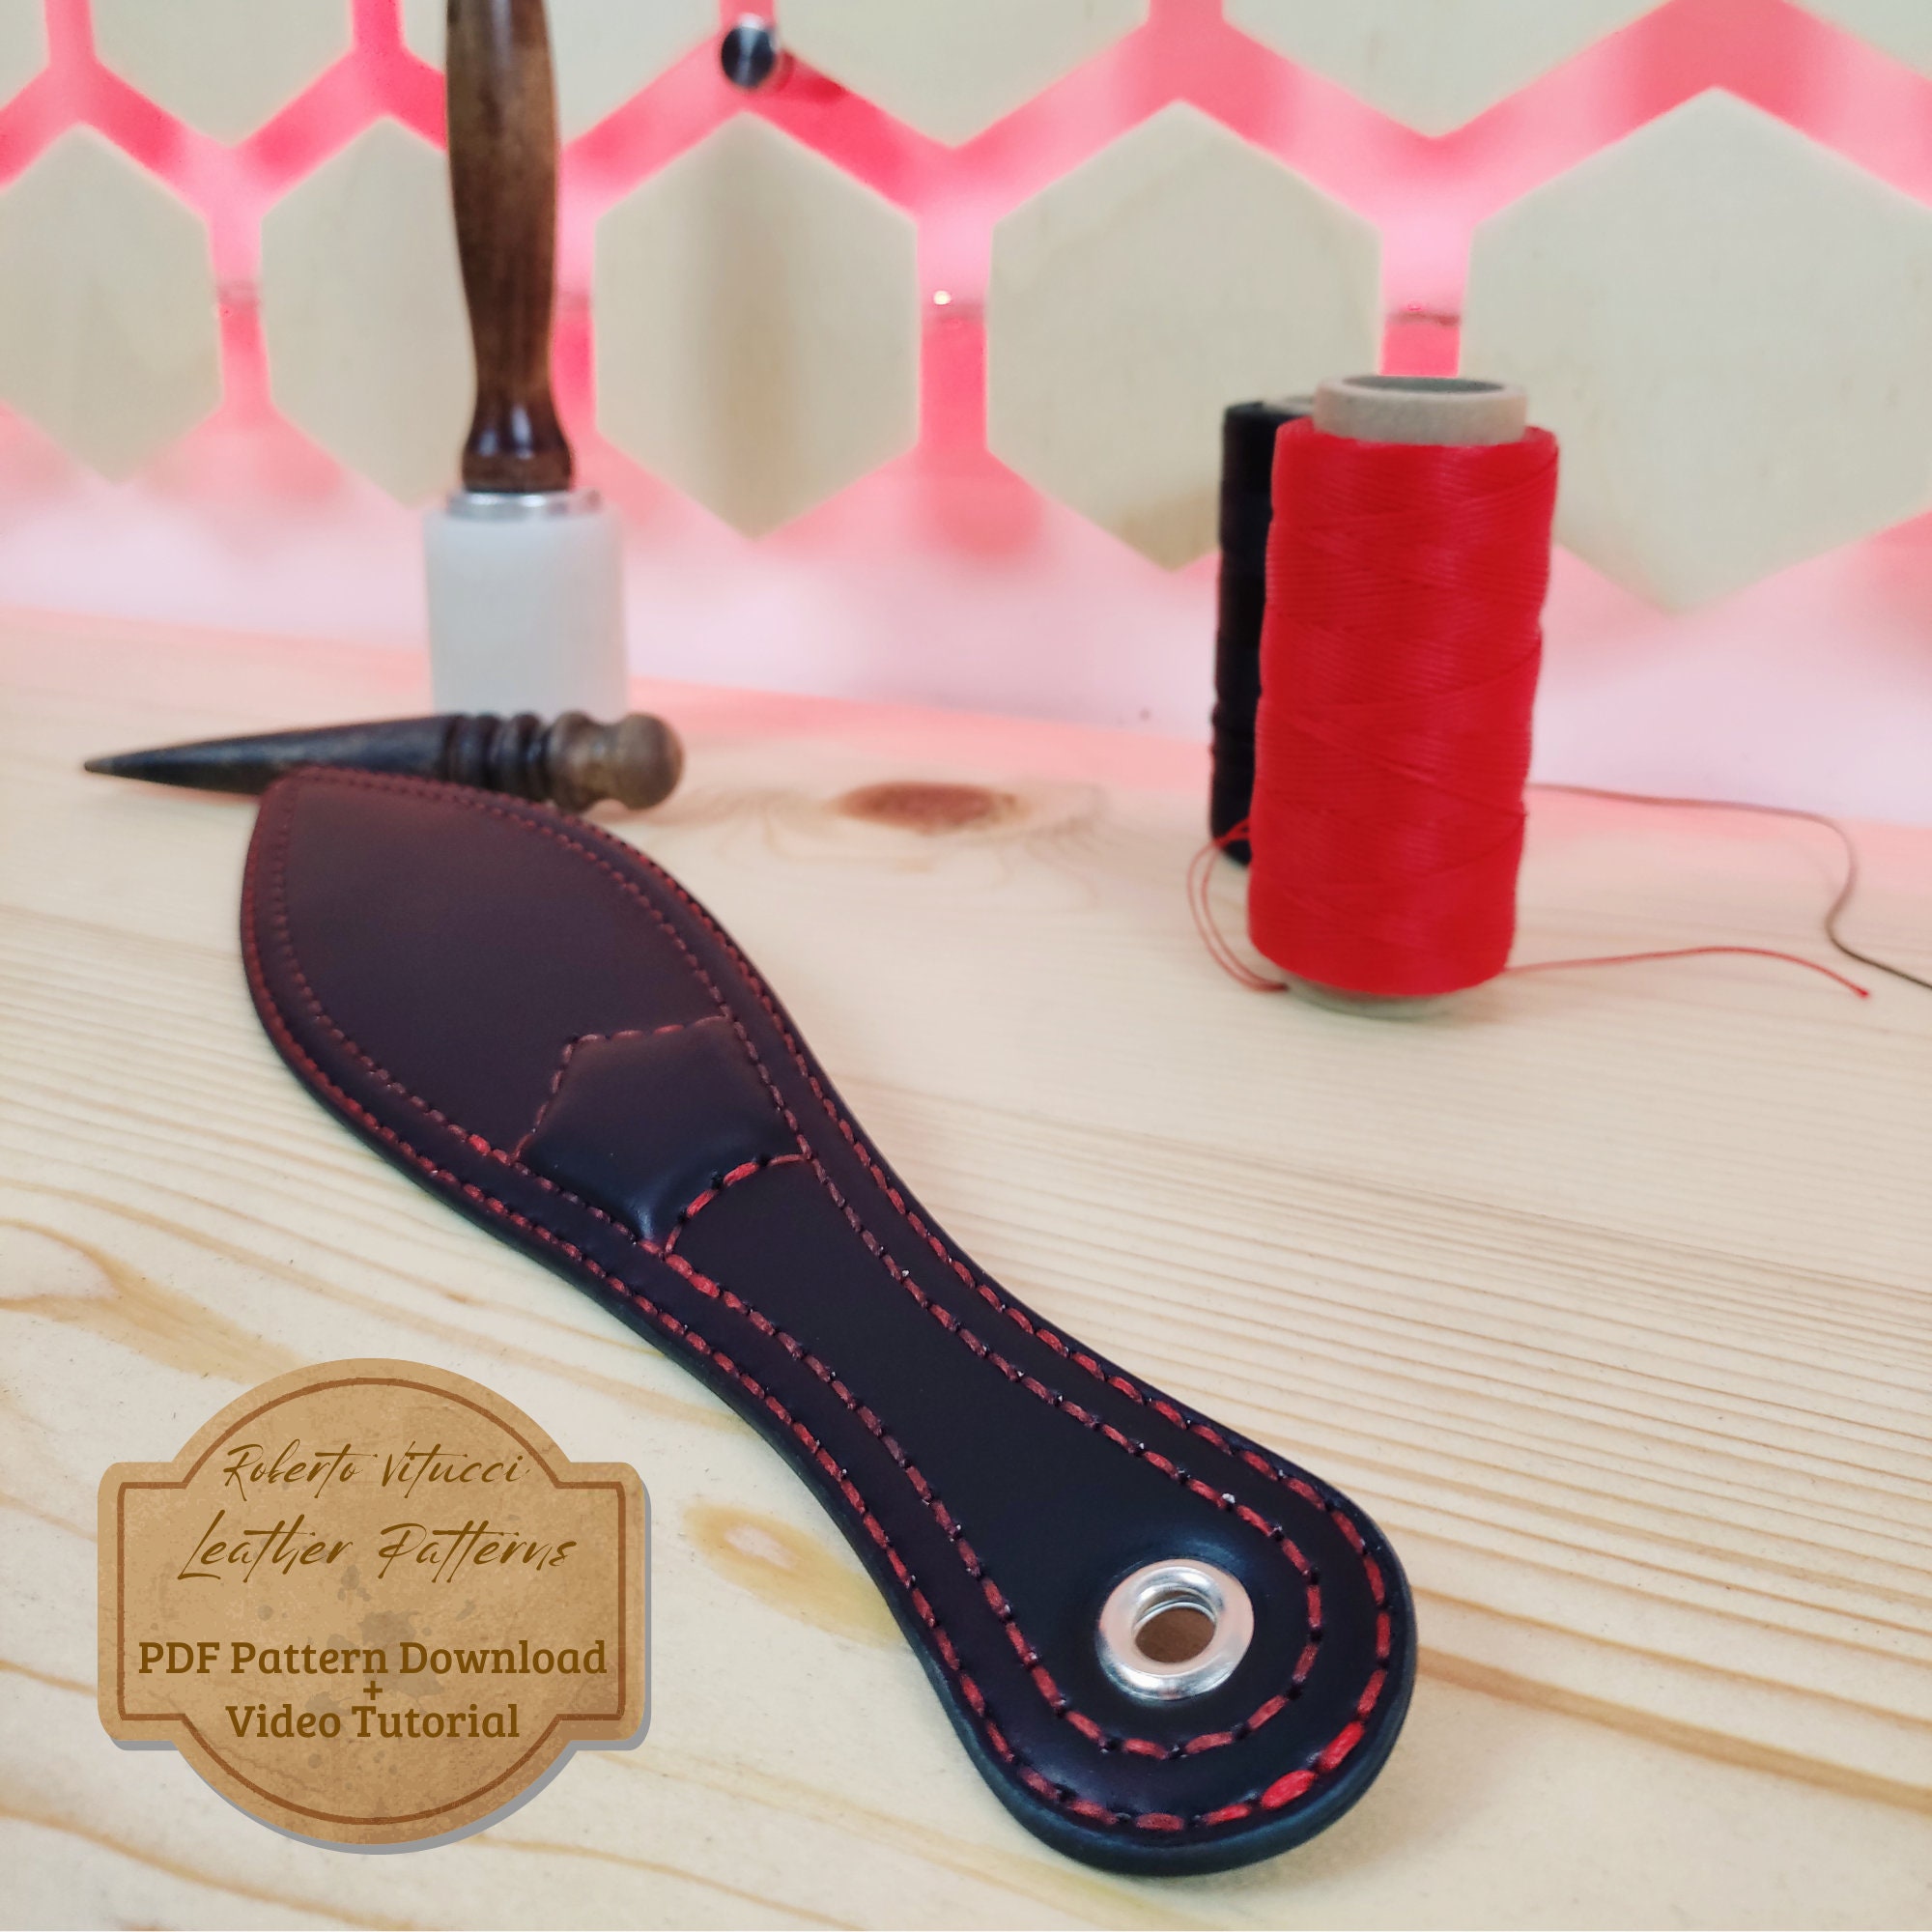 How to make a Leather Spanking Paddle - DIY - Instructional Video